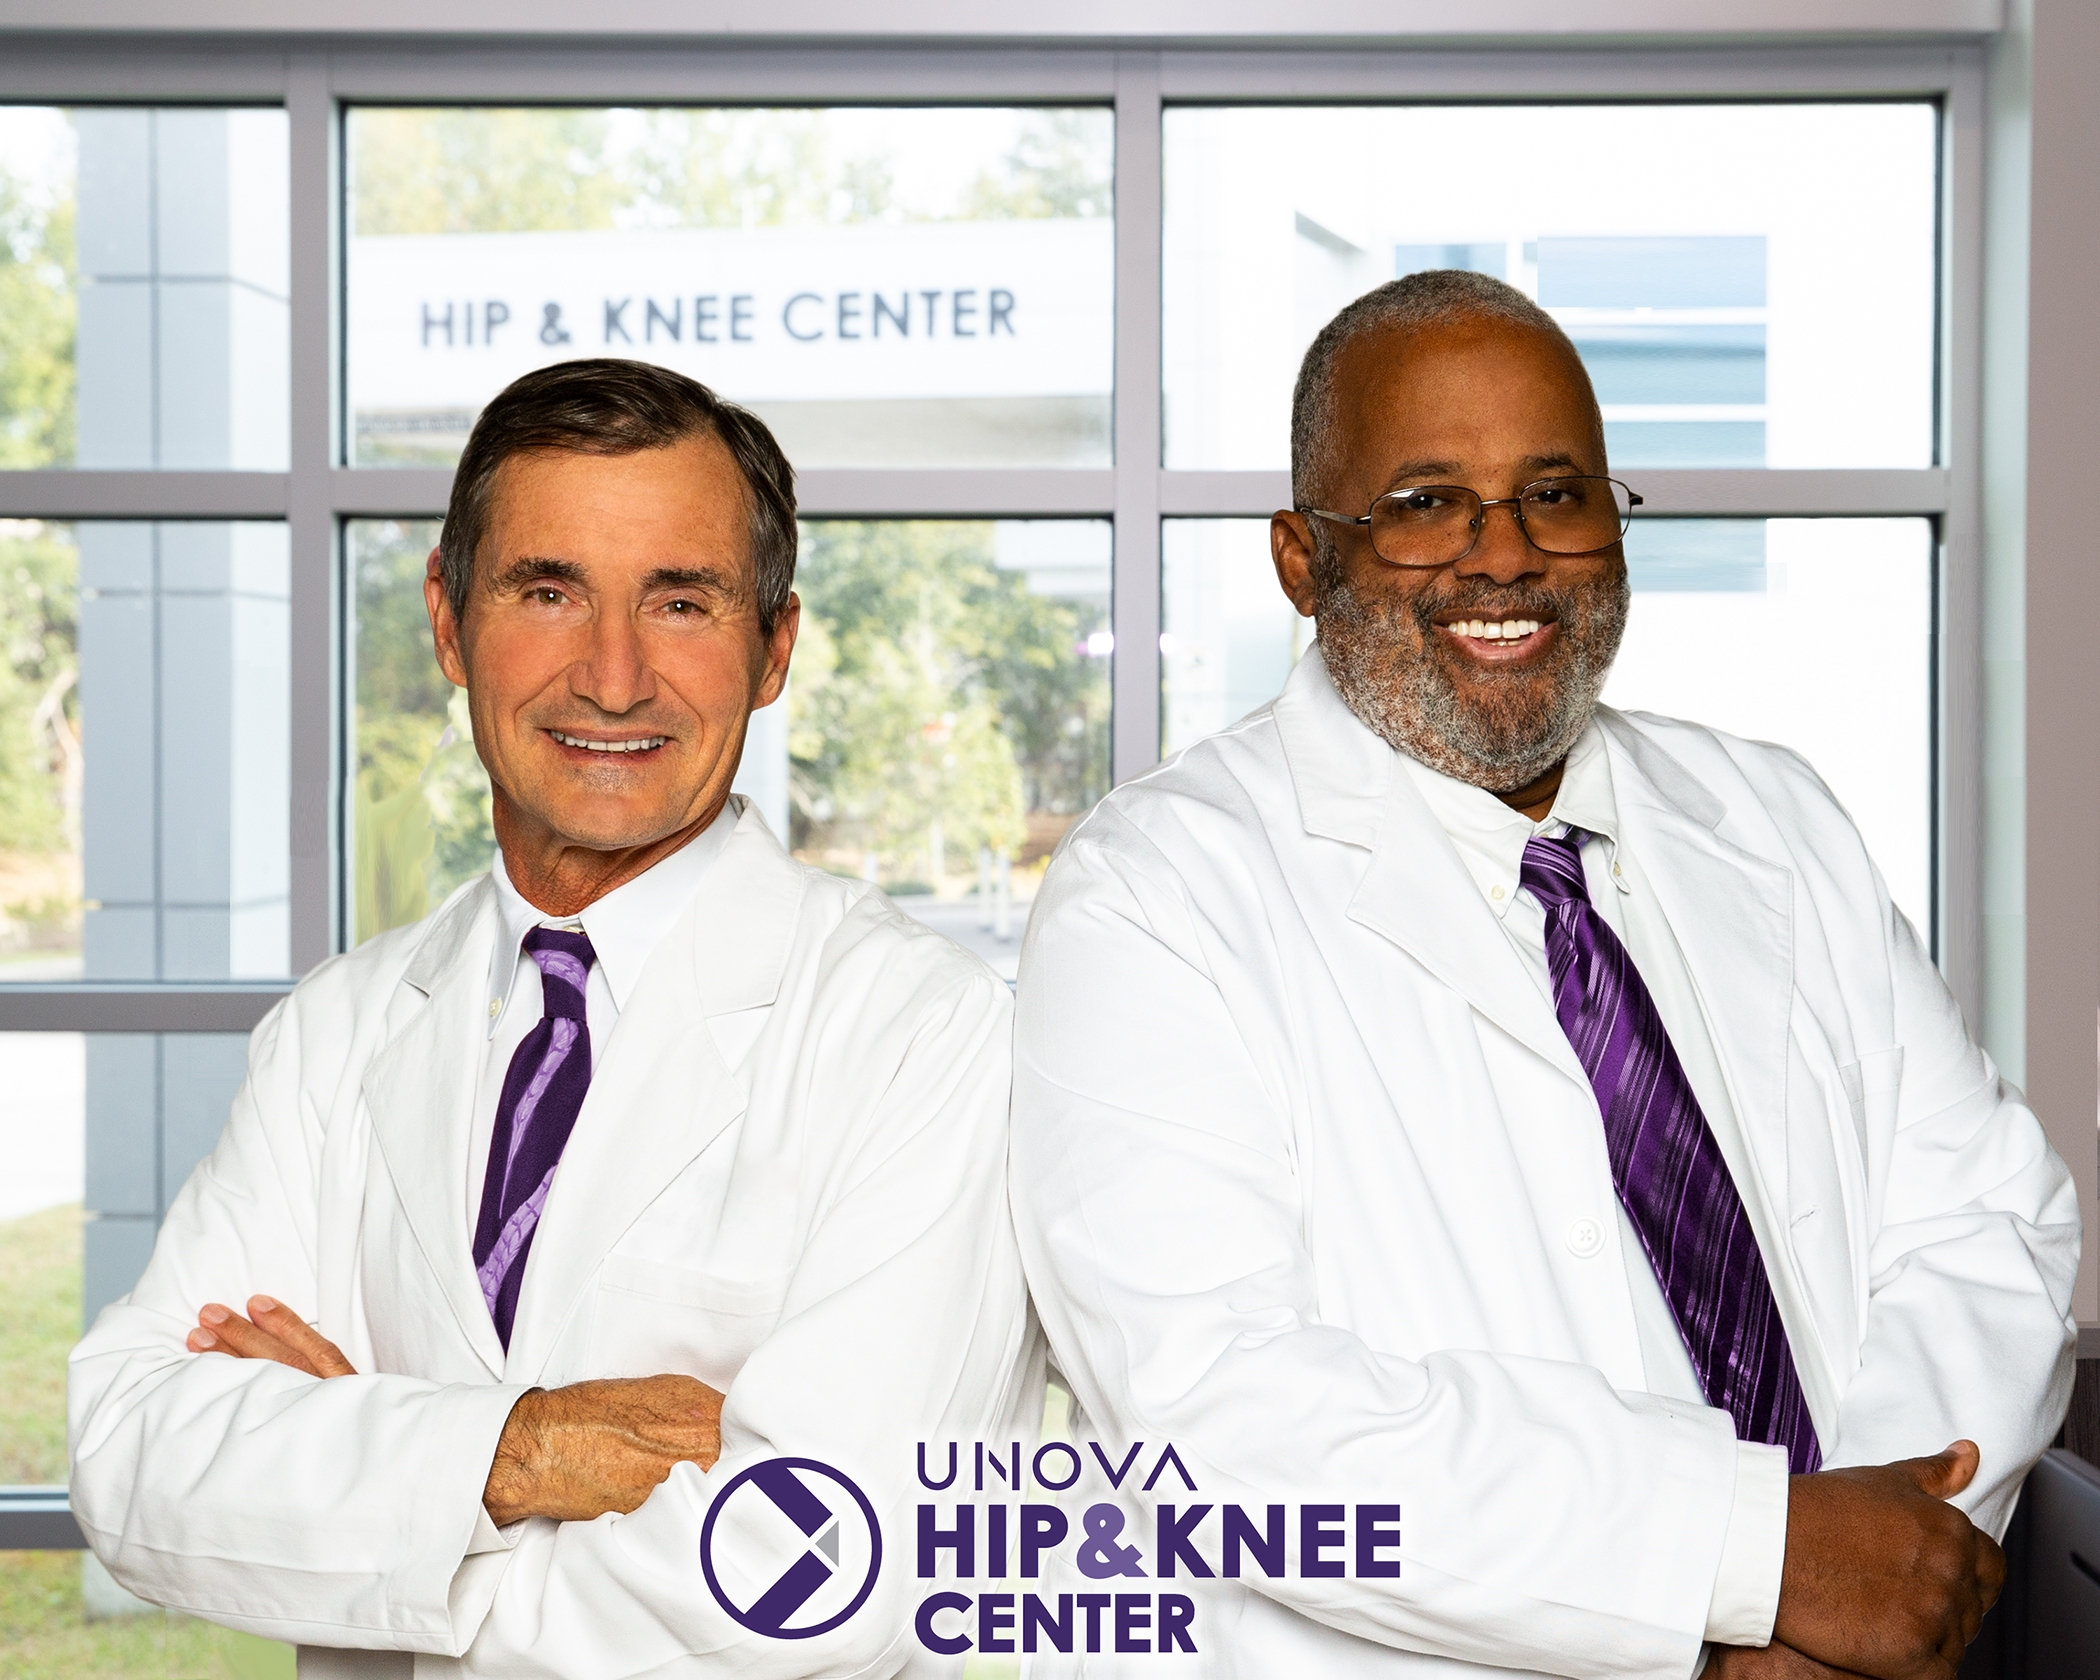 Leading Orthopedic Surgeons At Unova Hip And Knee Center Set The Record